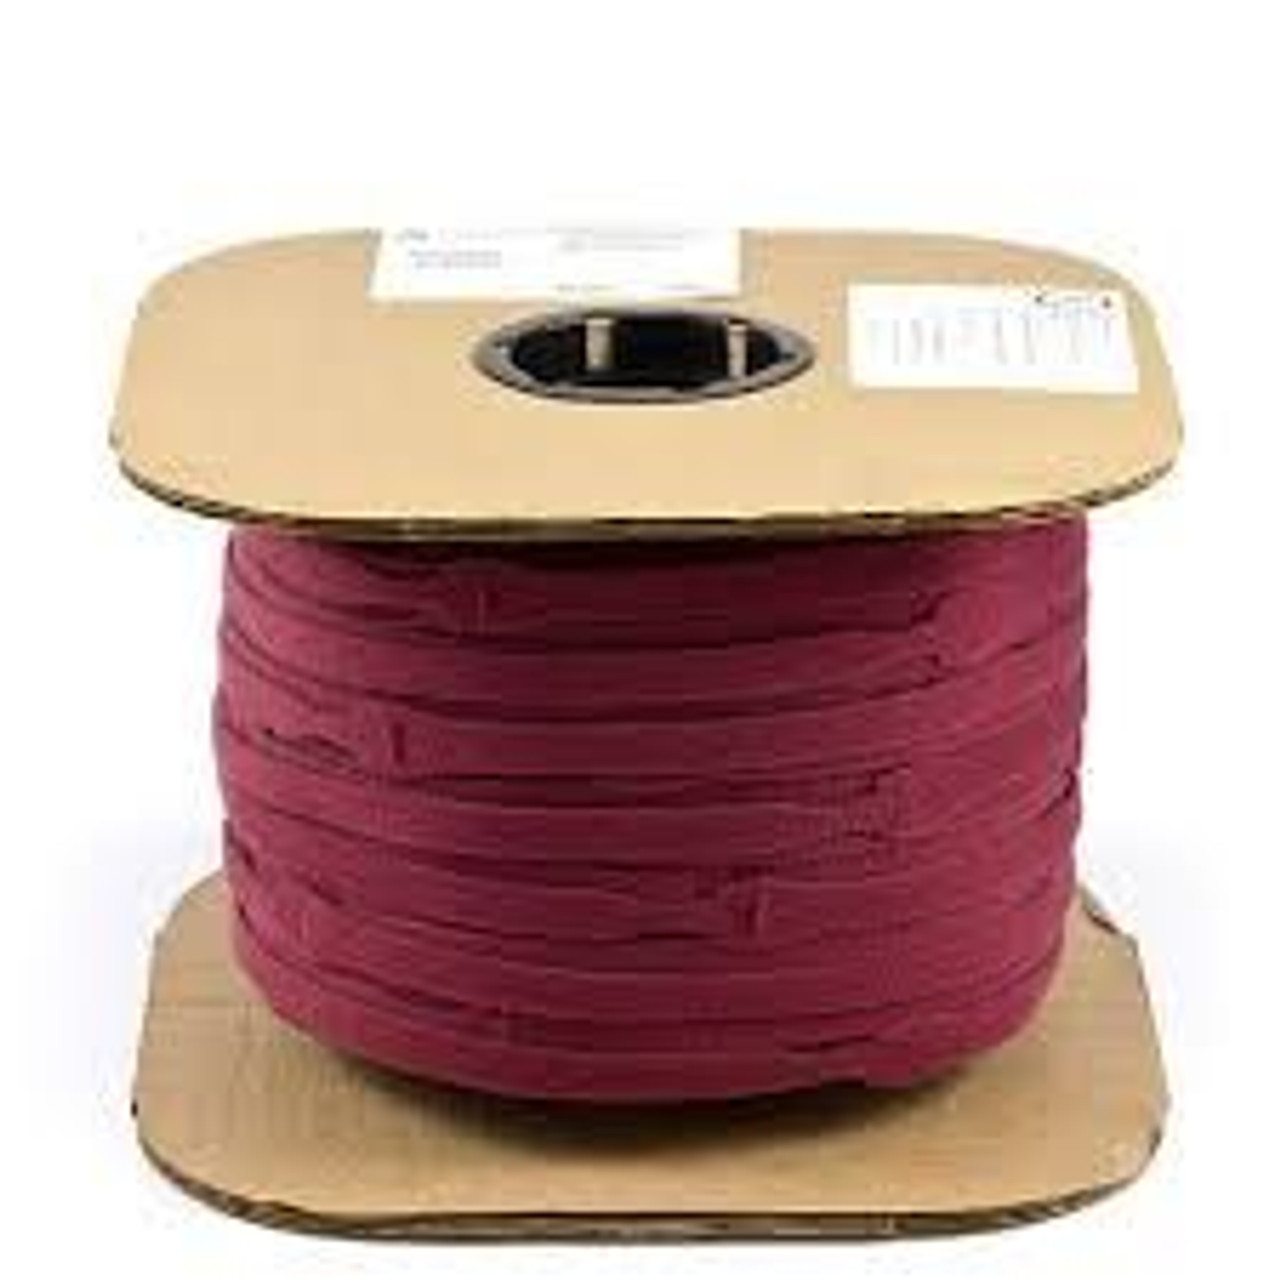 Which Velcro do you use to help wrap cables? I have both the cable